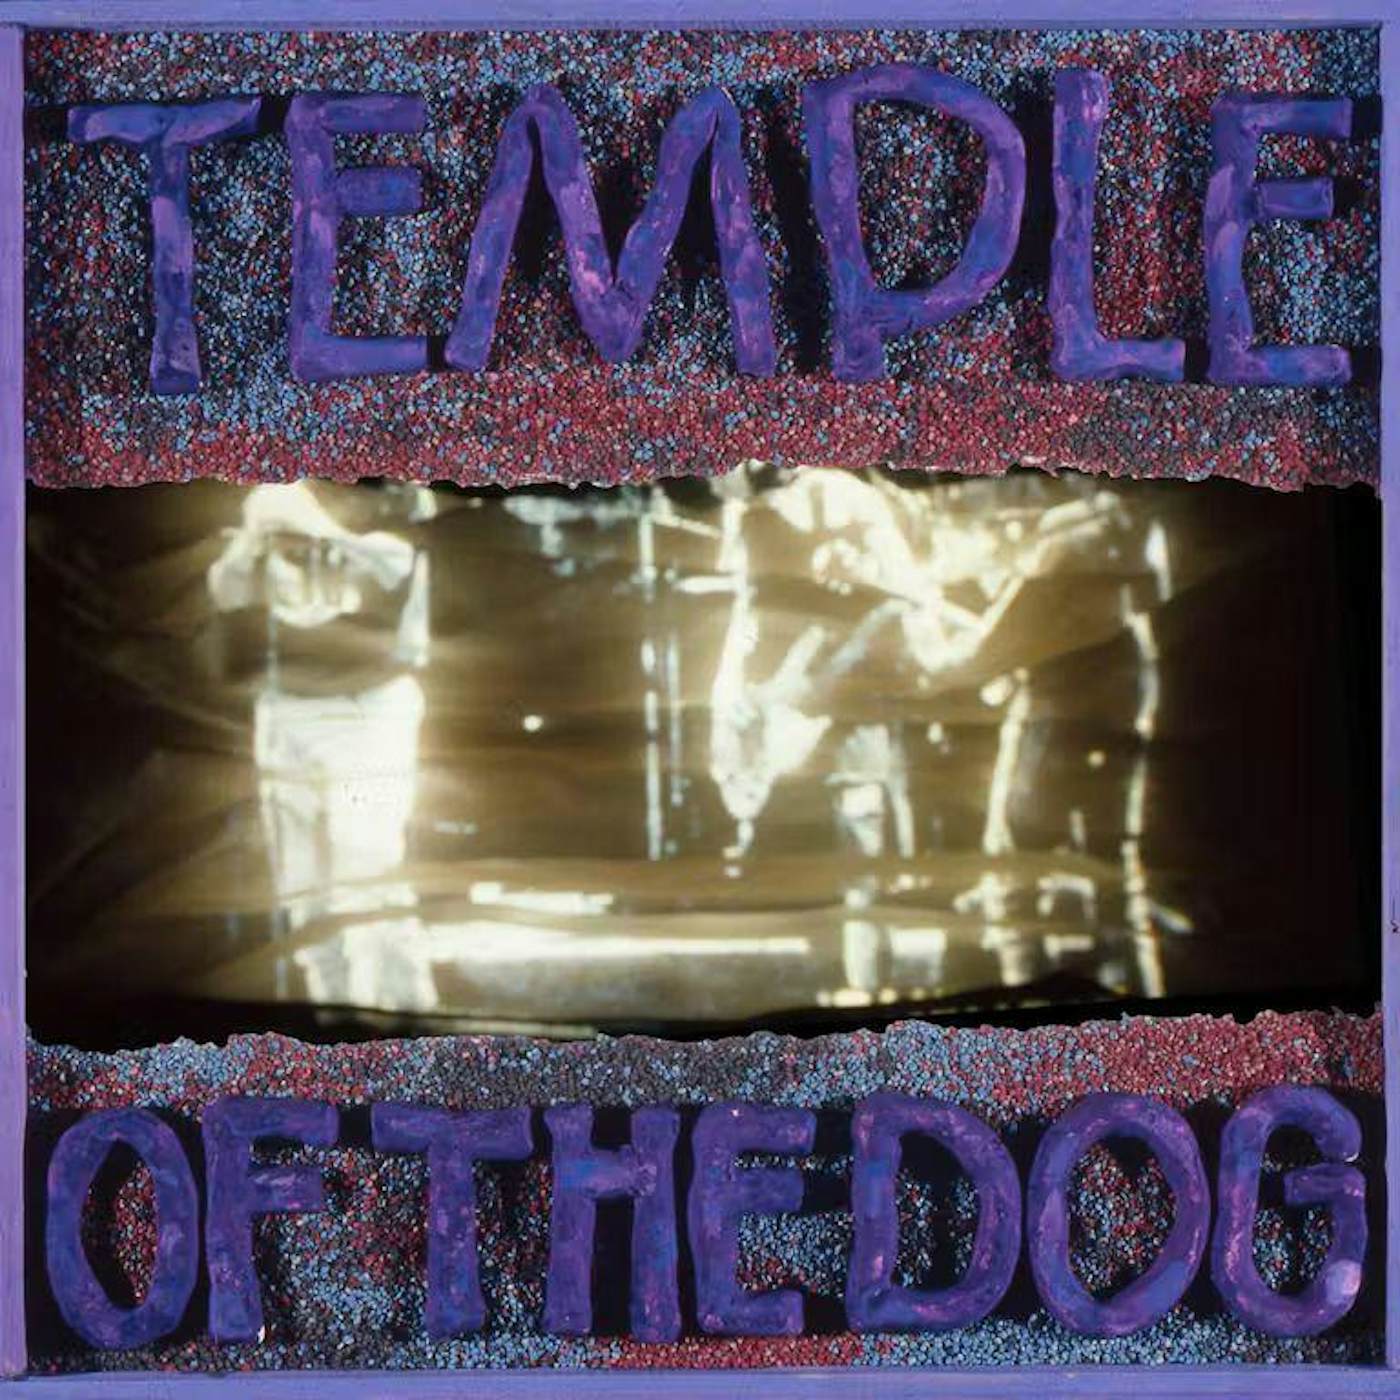  Temple Of The Dog (2LP/Deluxe) Vinyl Record